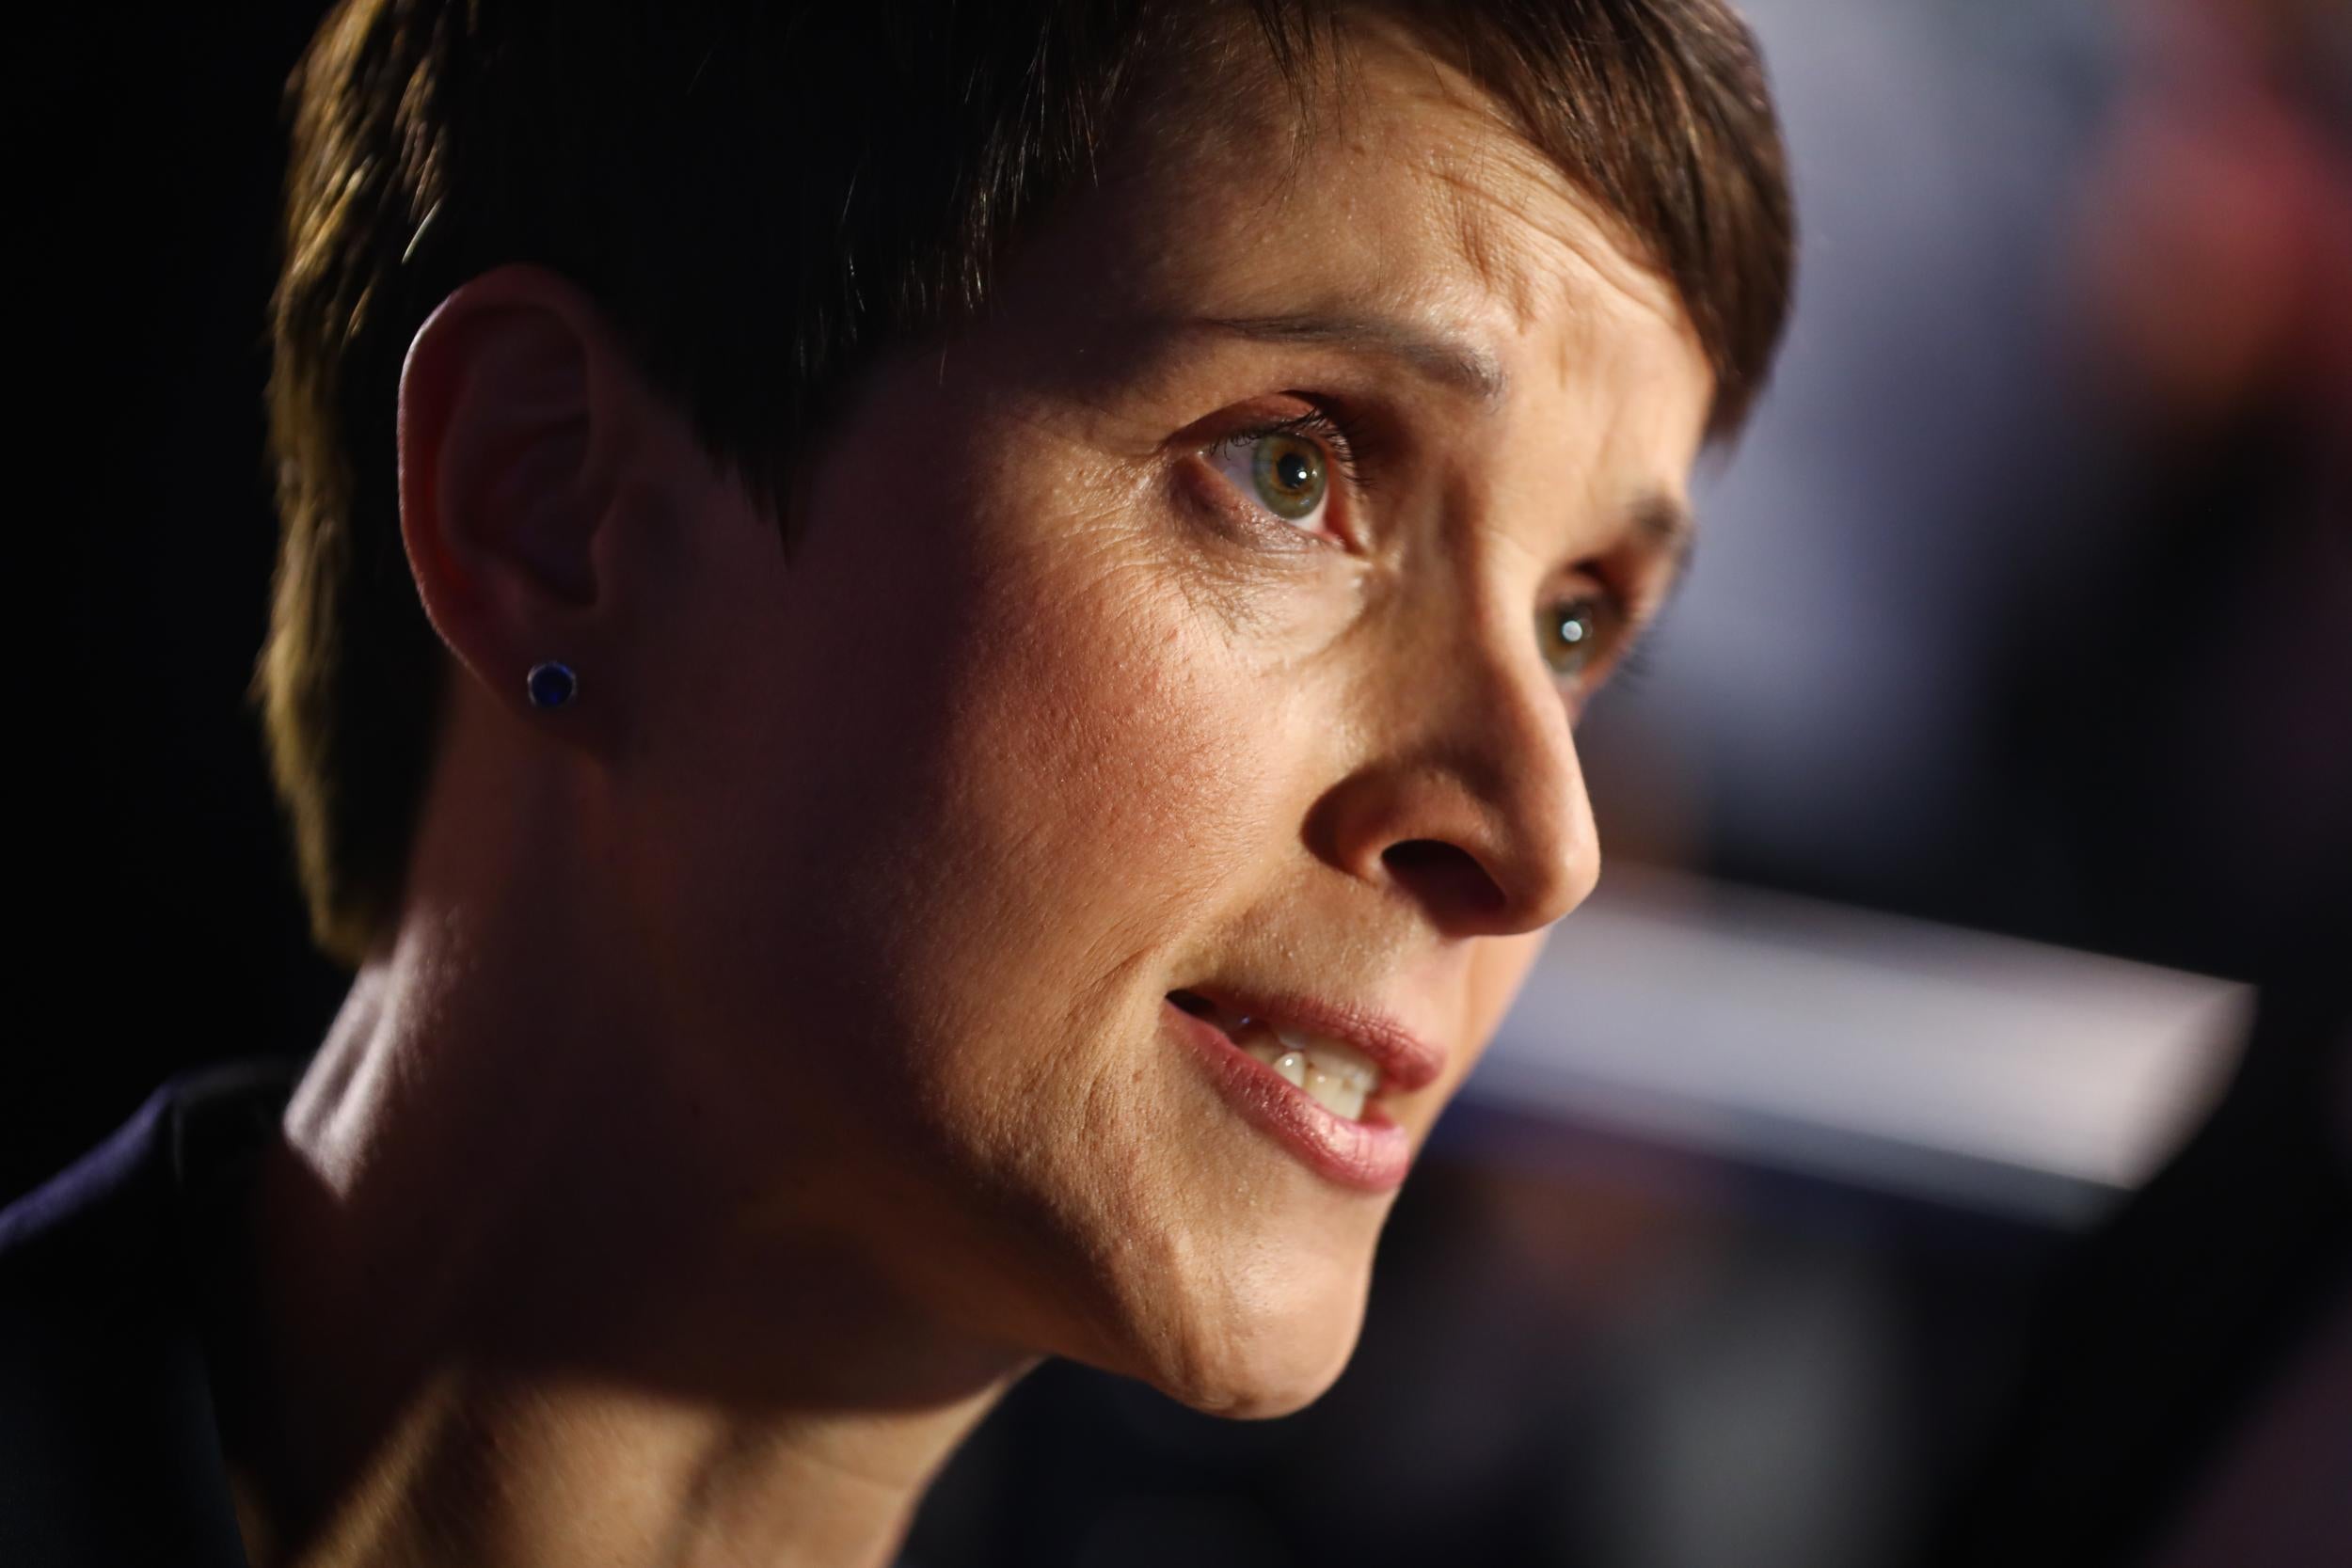 Frauke Petry, co-chair of AfD, quit the party the morning after the election results (Getty)